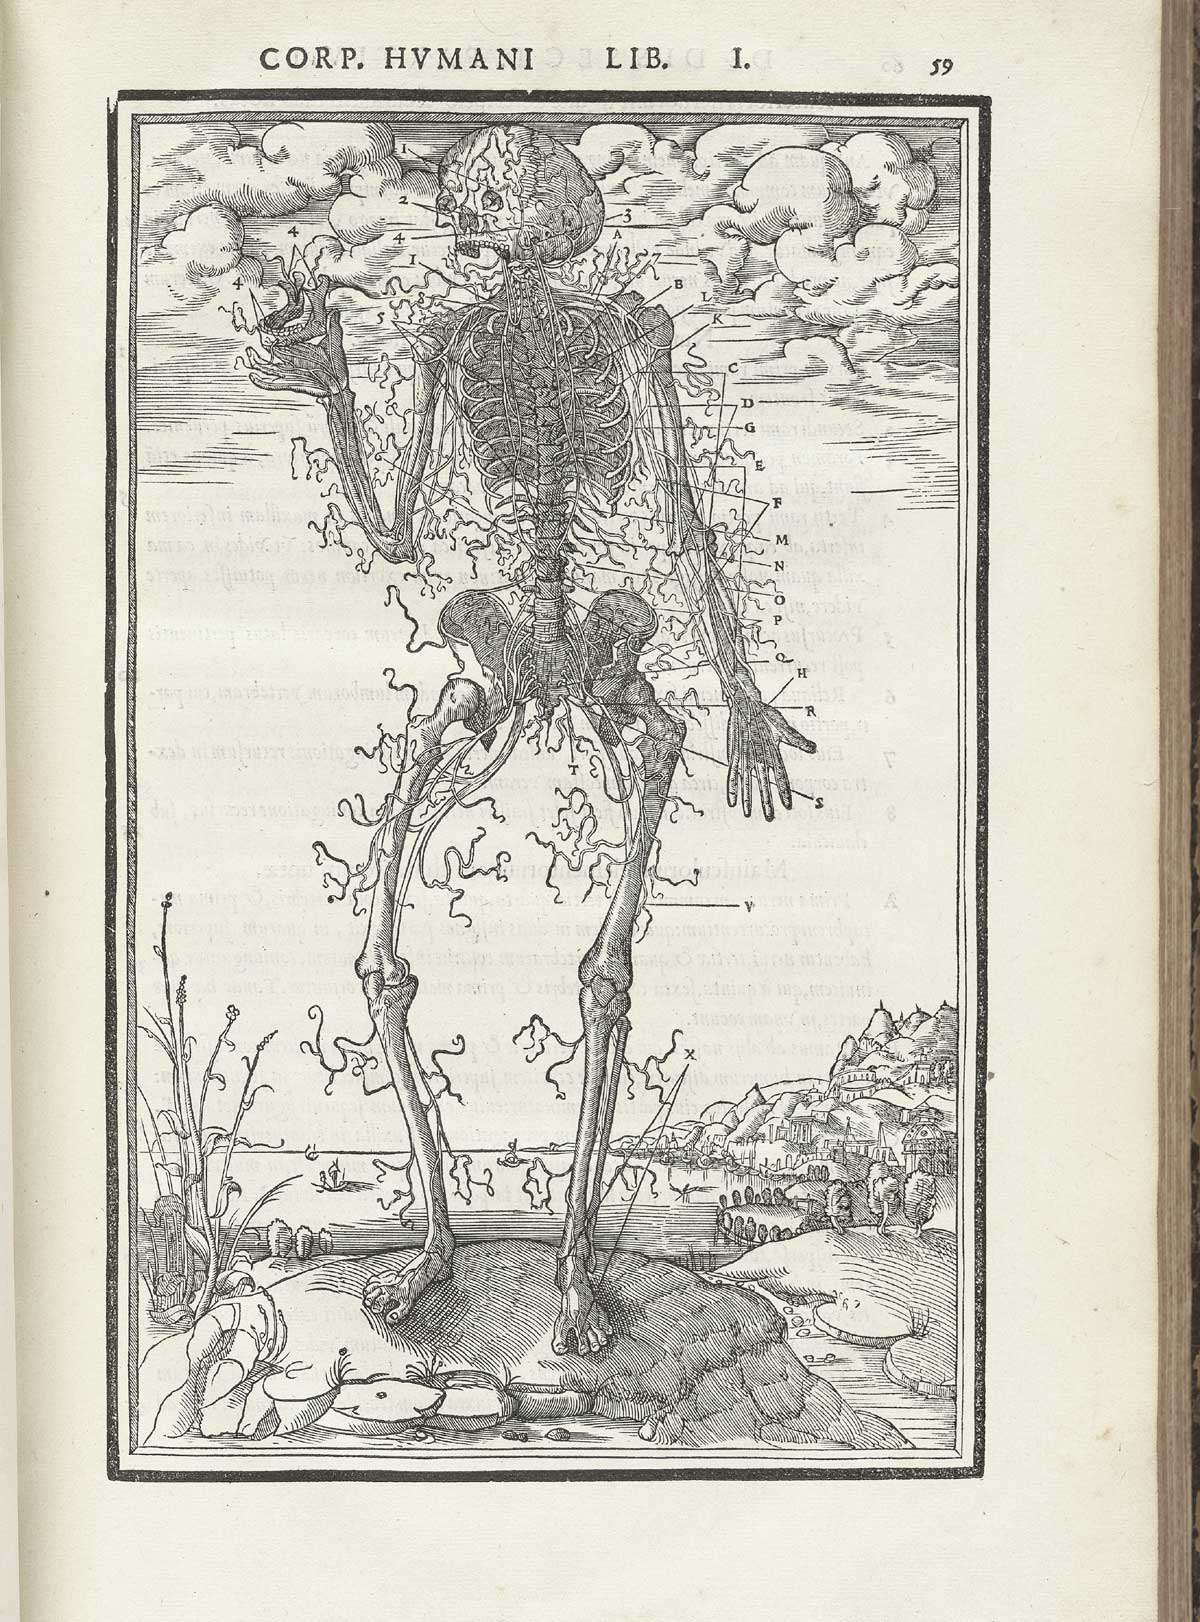 Woodcut skeleton figure standing on a marble column base in a pastoral setting, facing the viewer, with index letters surrounding him pointing to numerous bone structures, from Charles Estienne’s De dissection partium corporis humani libri tres, NLM Call no.: WZ 240 E81dd 1545.